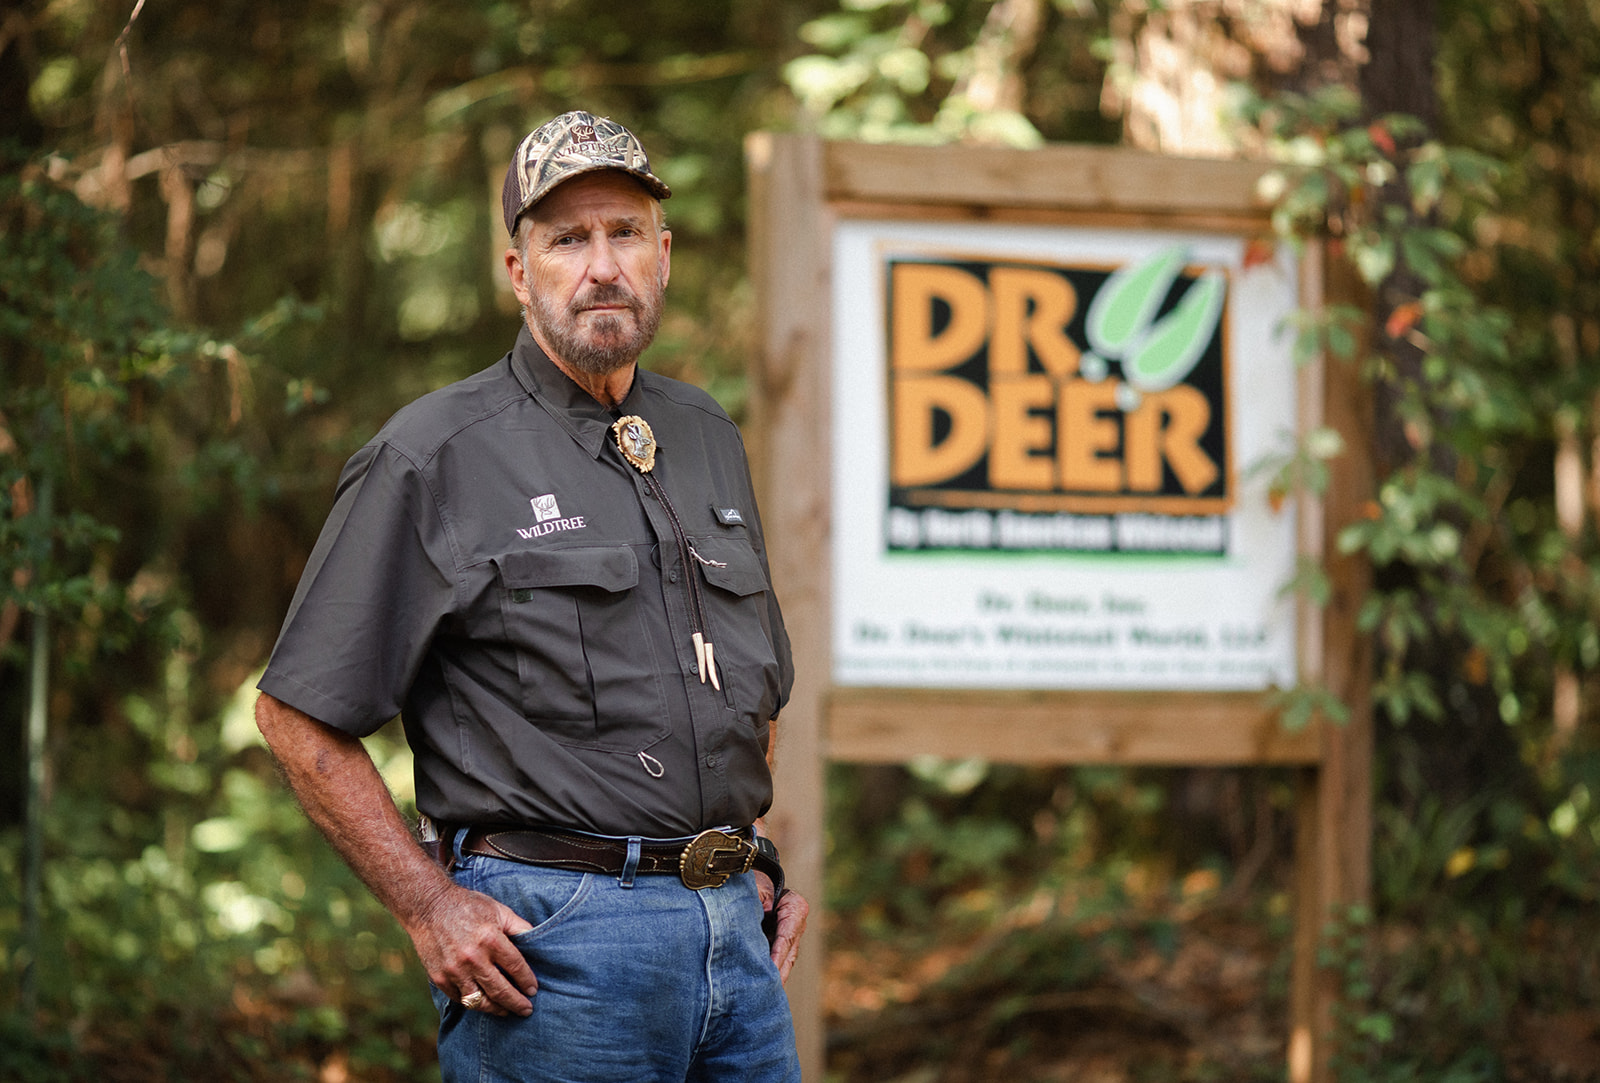 Wildtree Presents Dr. Deer’s 19th Annual Whitetail World Field Day